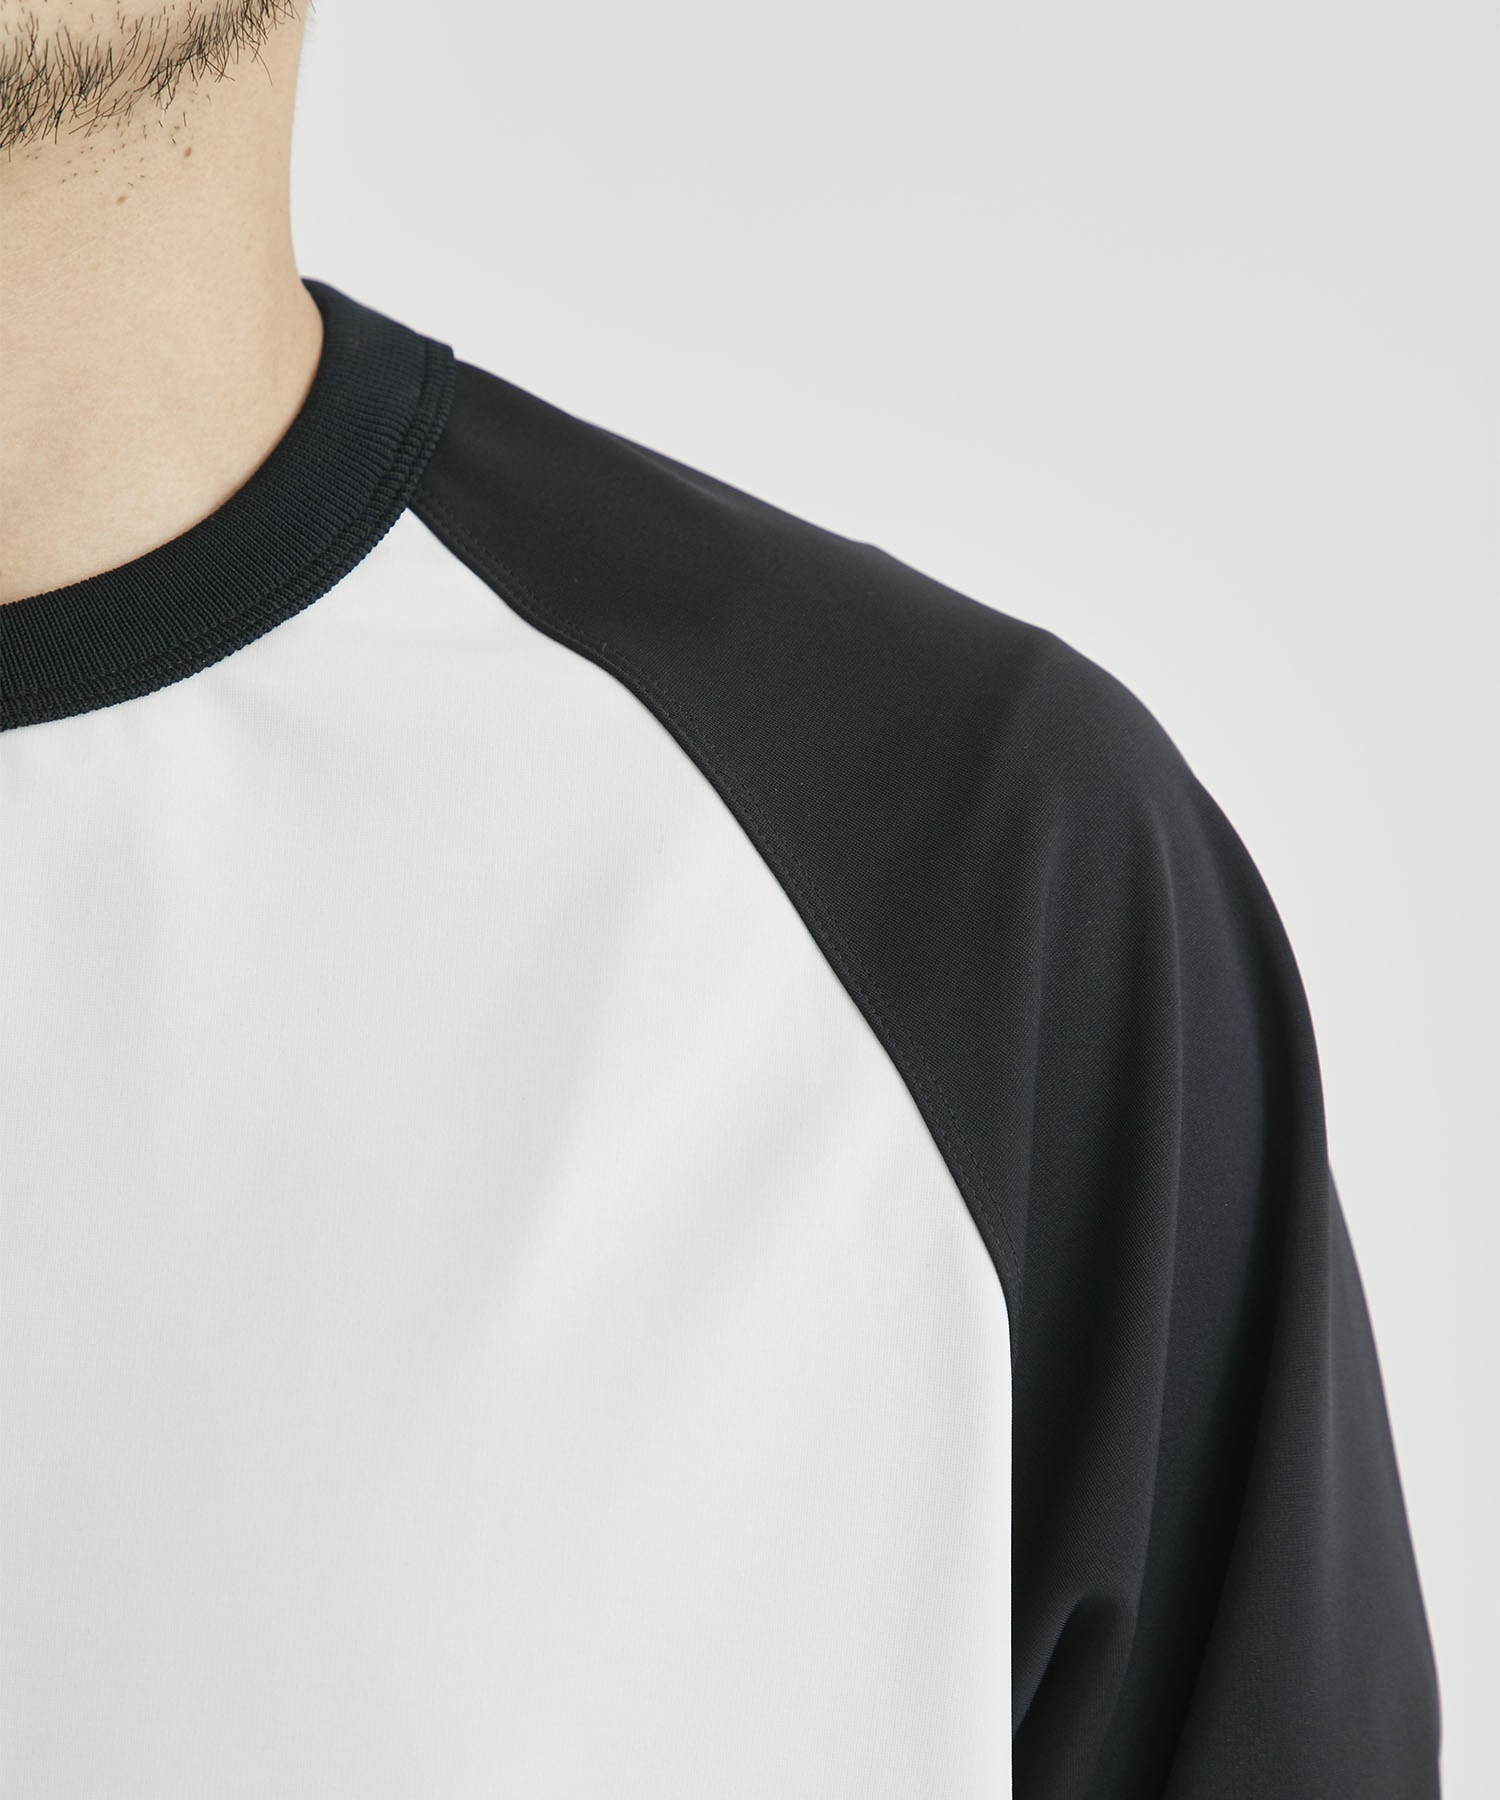 Washable High Function Jersey Raglan L/S Tops THE PERMANENT EYE